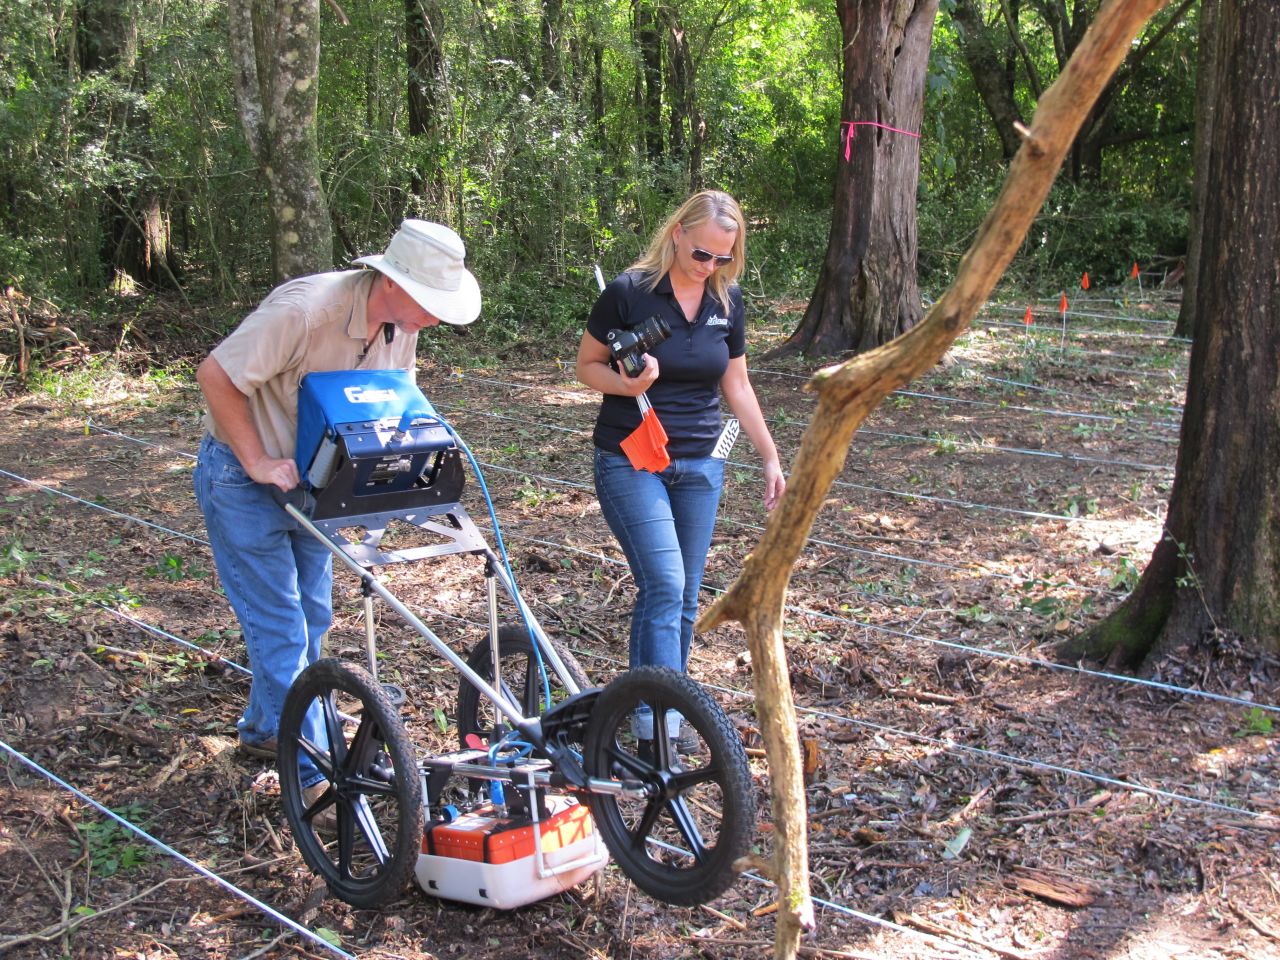 During the original investigation, forensic anthropologists used ground penetrating radar to find out how many remains were buried.